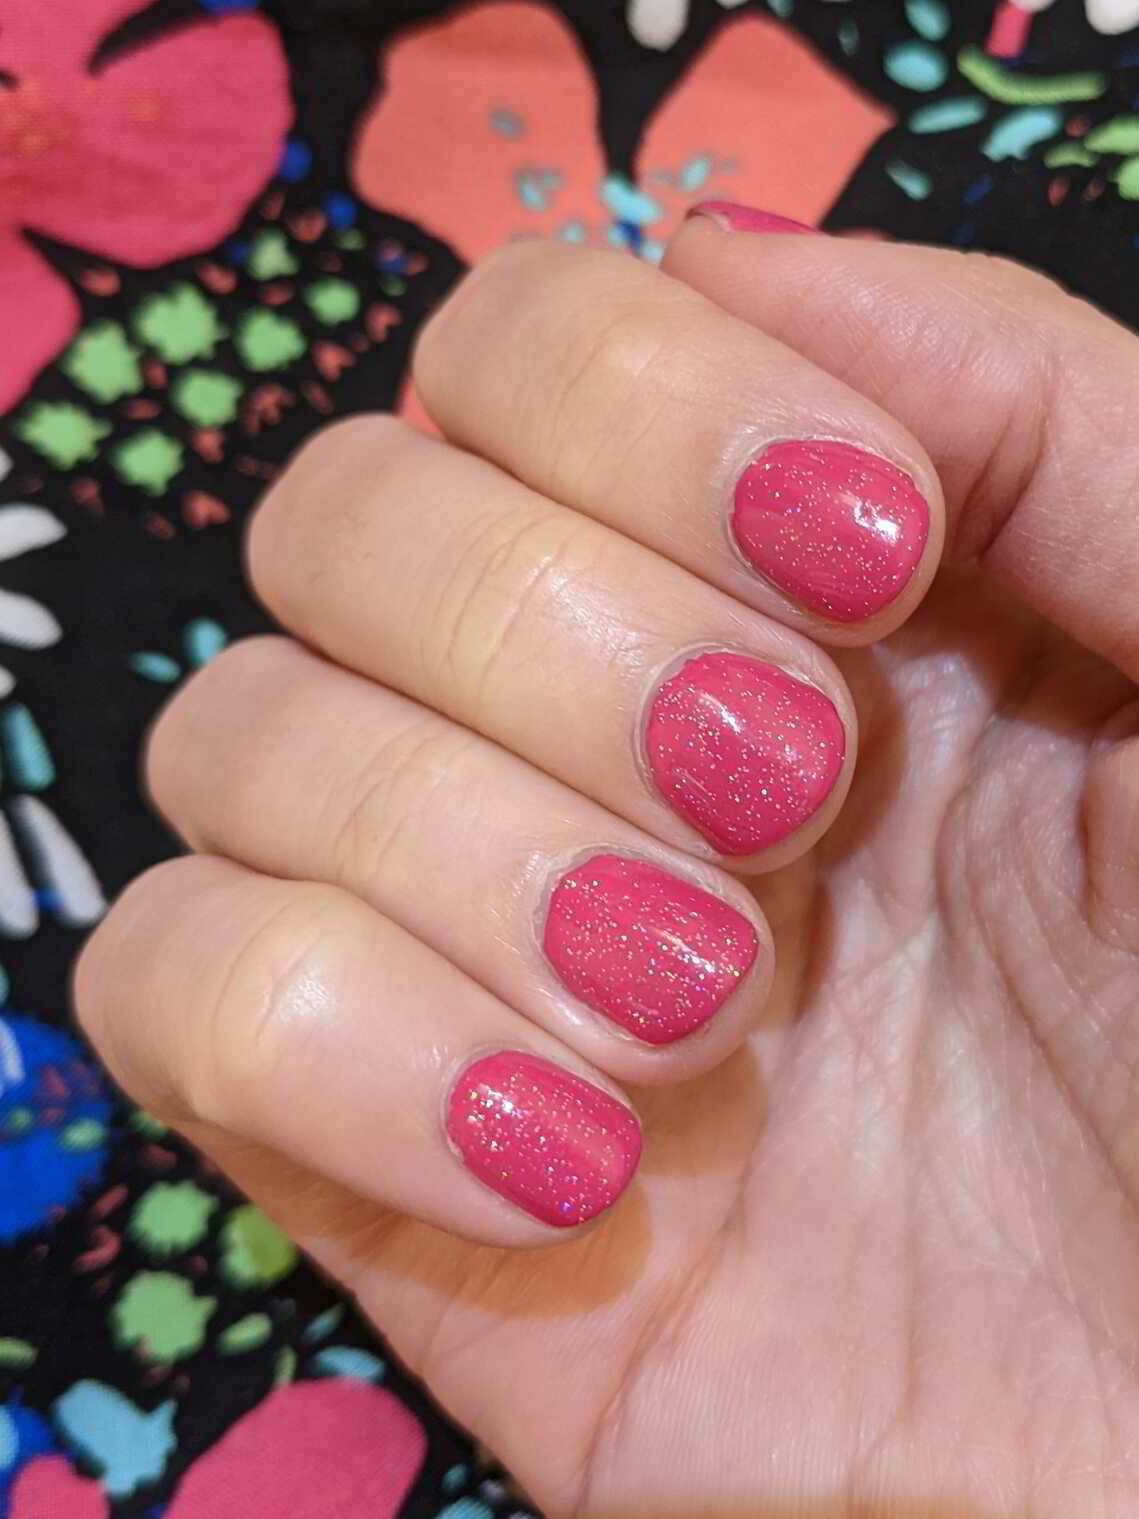 Nail polish manicure of shade OPI Glitter Off, Sally Hansen Fuchsia Power,Holo Taco Scattered Holo Taco,Out The Door Super Fast Drying Top Coat